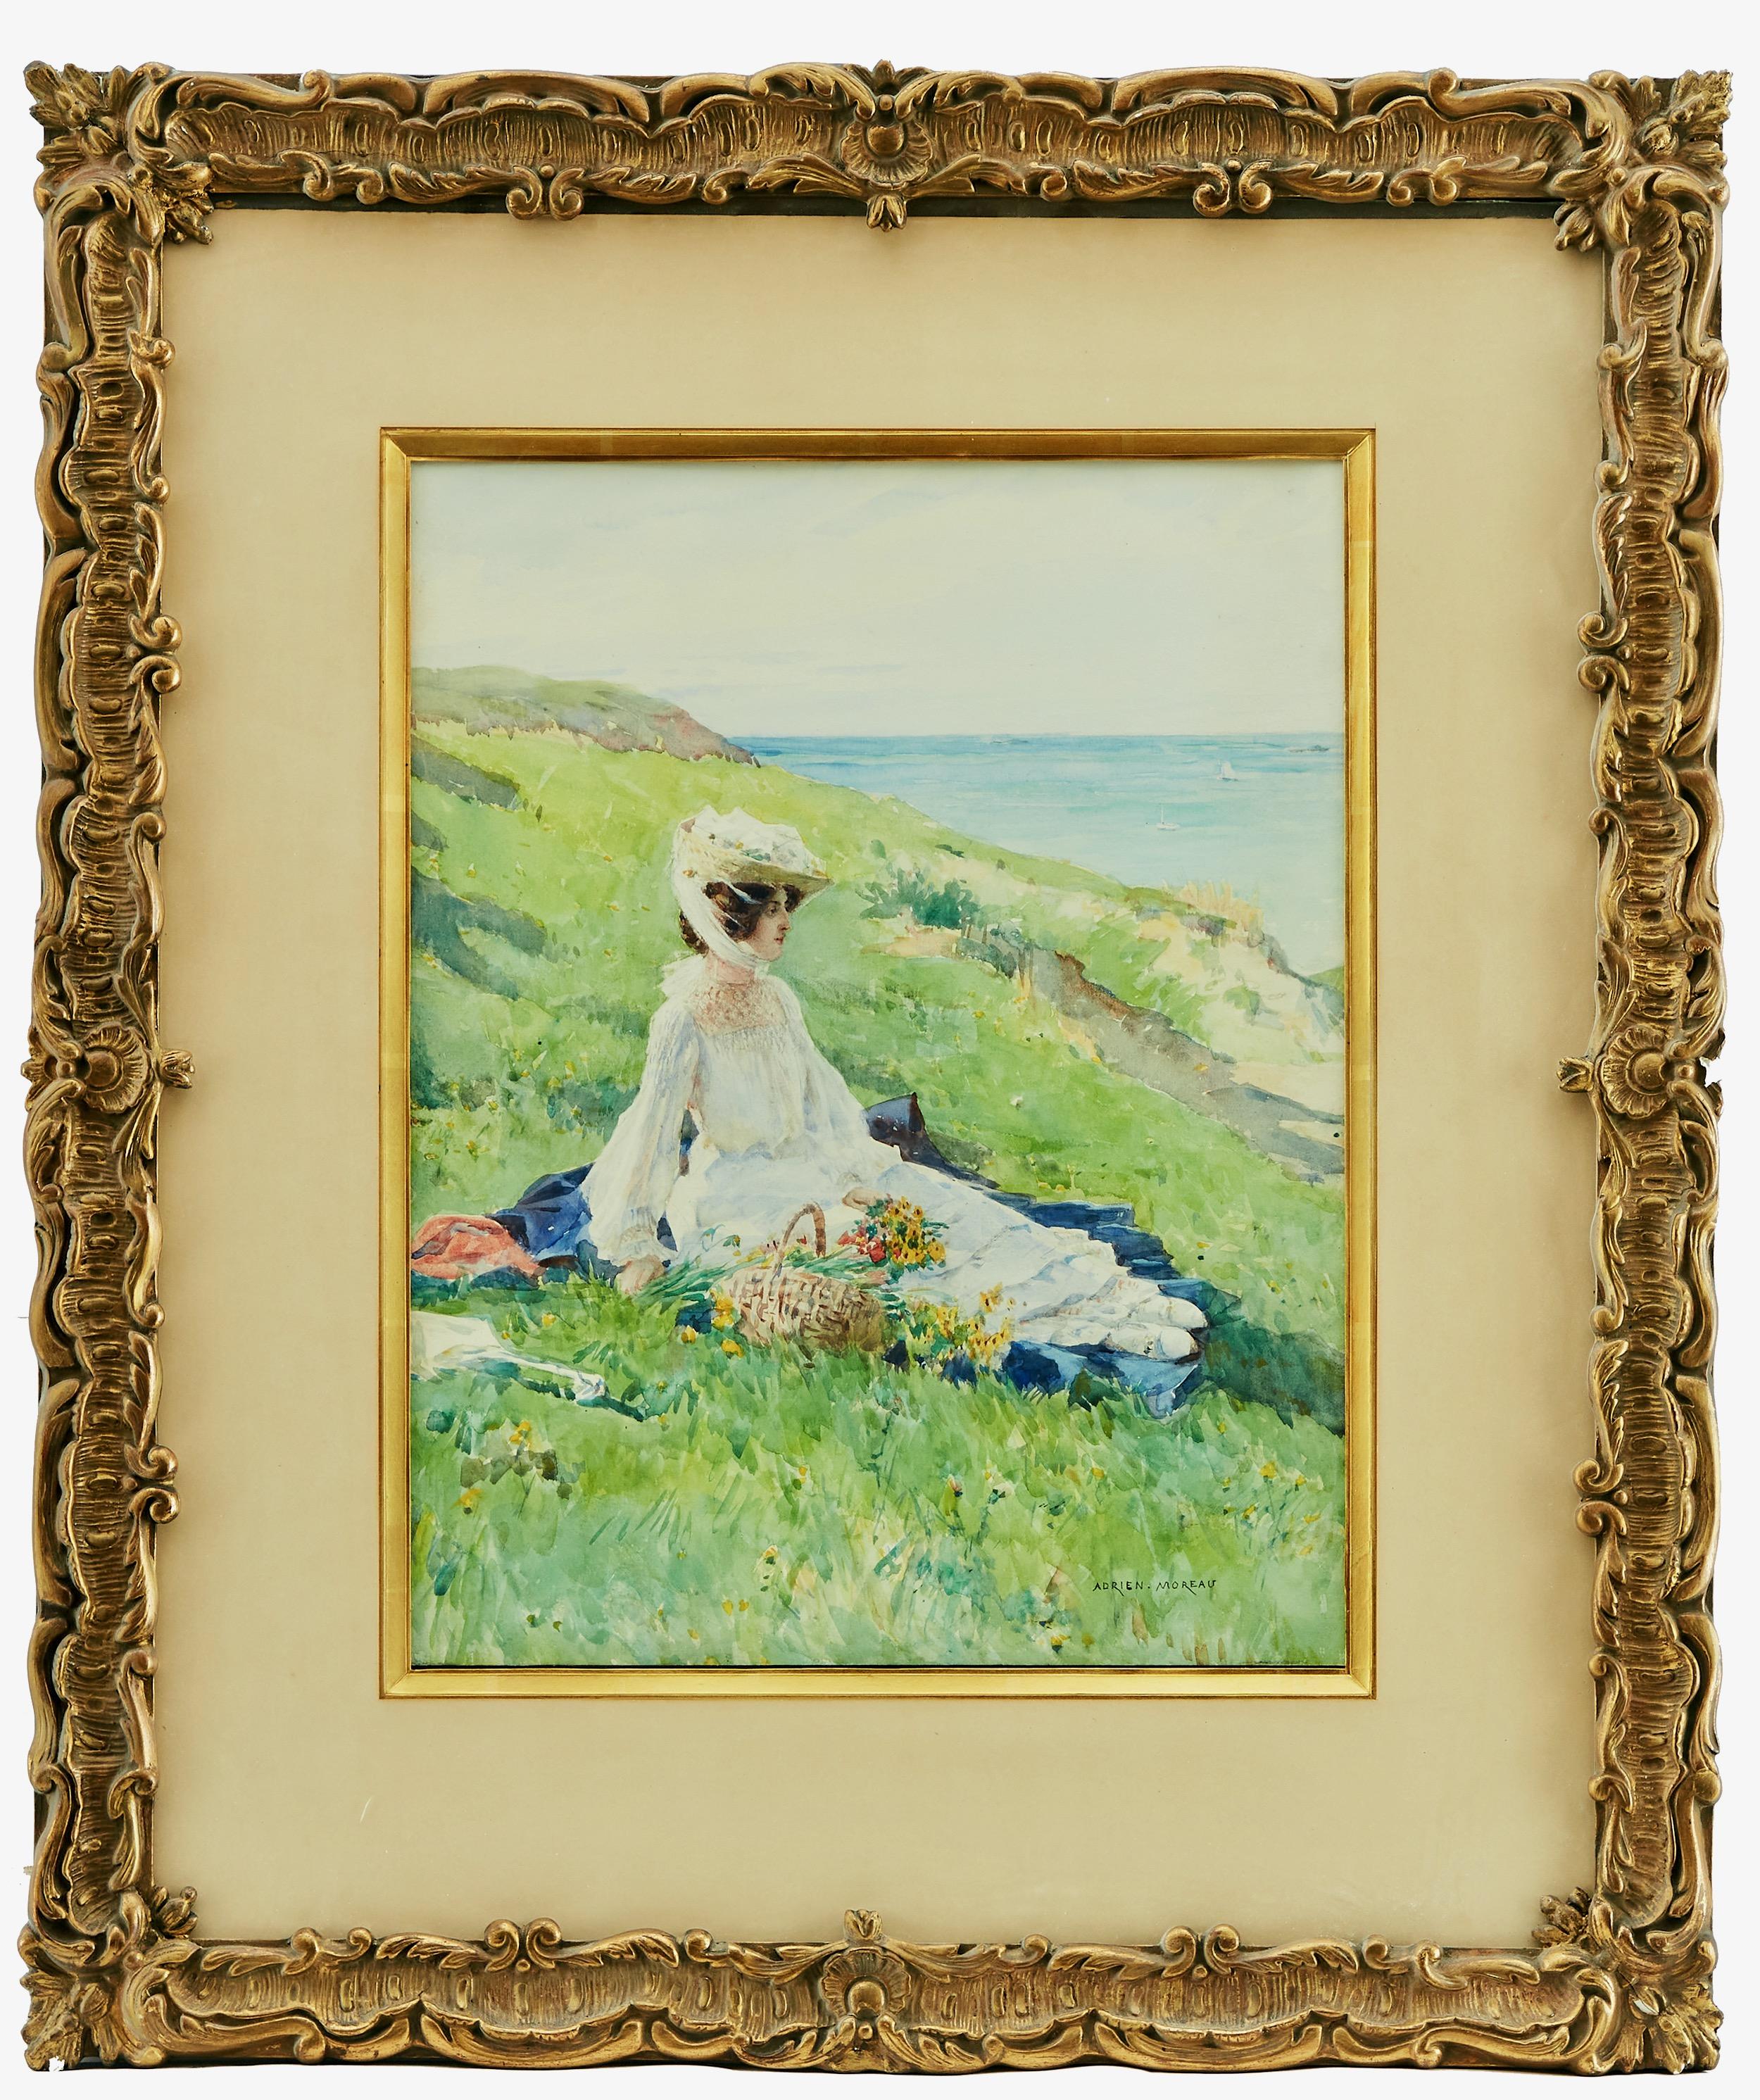 A beautiful watercolor by Adrien Moreau (1843-1906) showing a woman with freshly picked flowers in a basket resting in the grass by the sea. The colors are strong and it is mounted in a beautiful gilded frame. 

Adrien Moreau was a French genre and